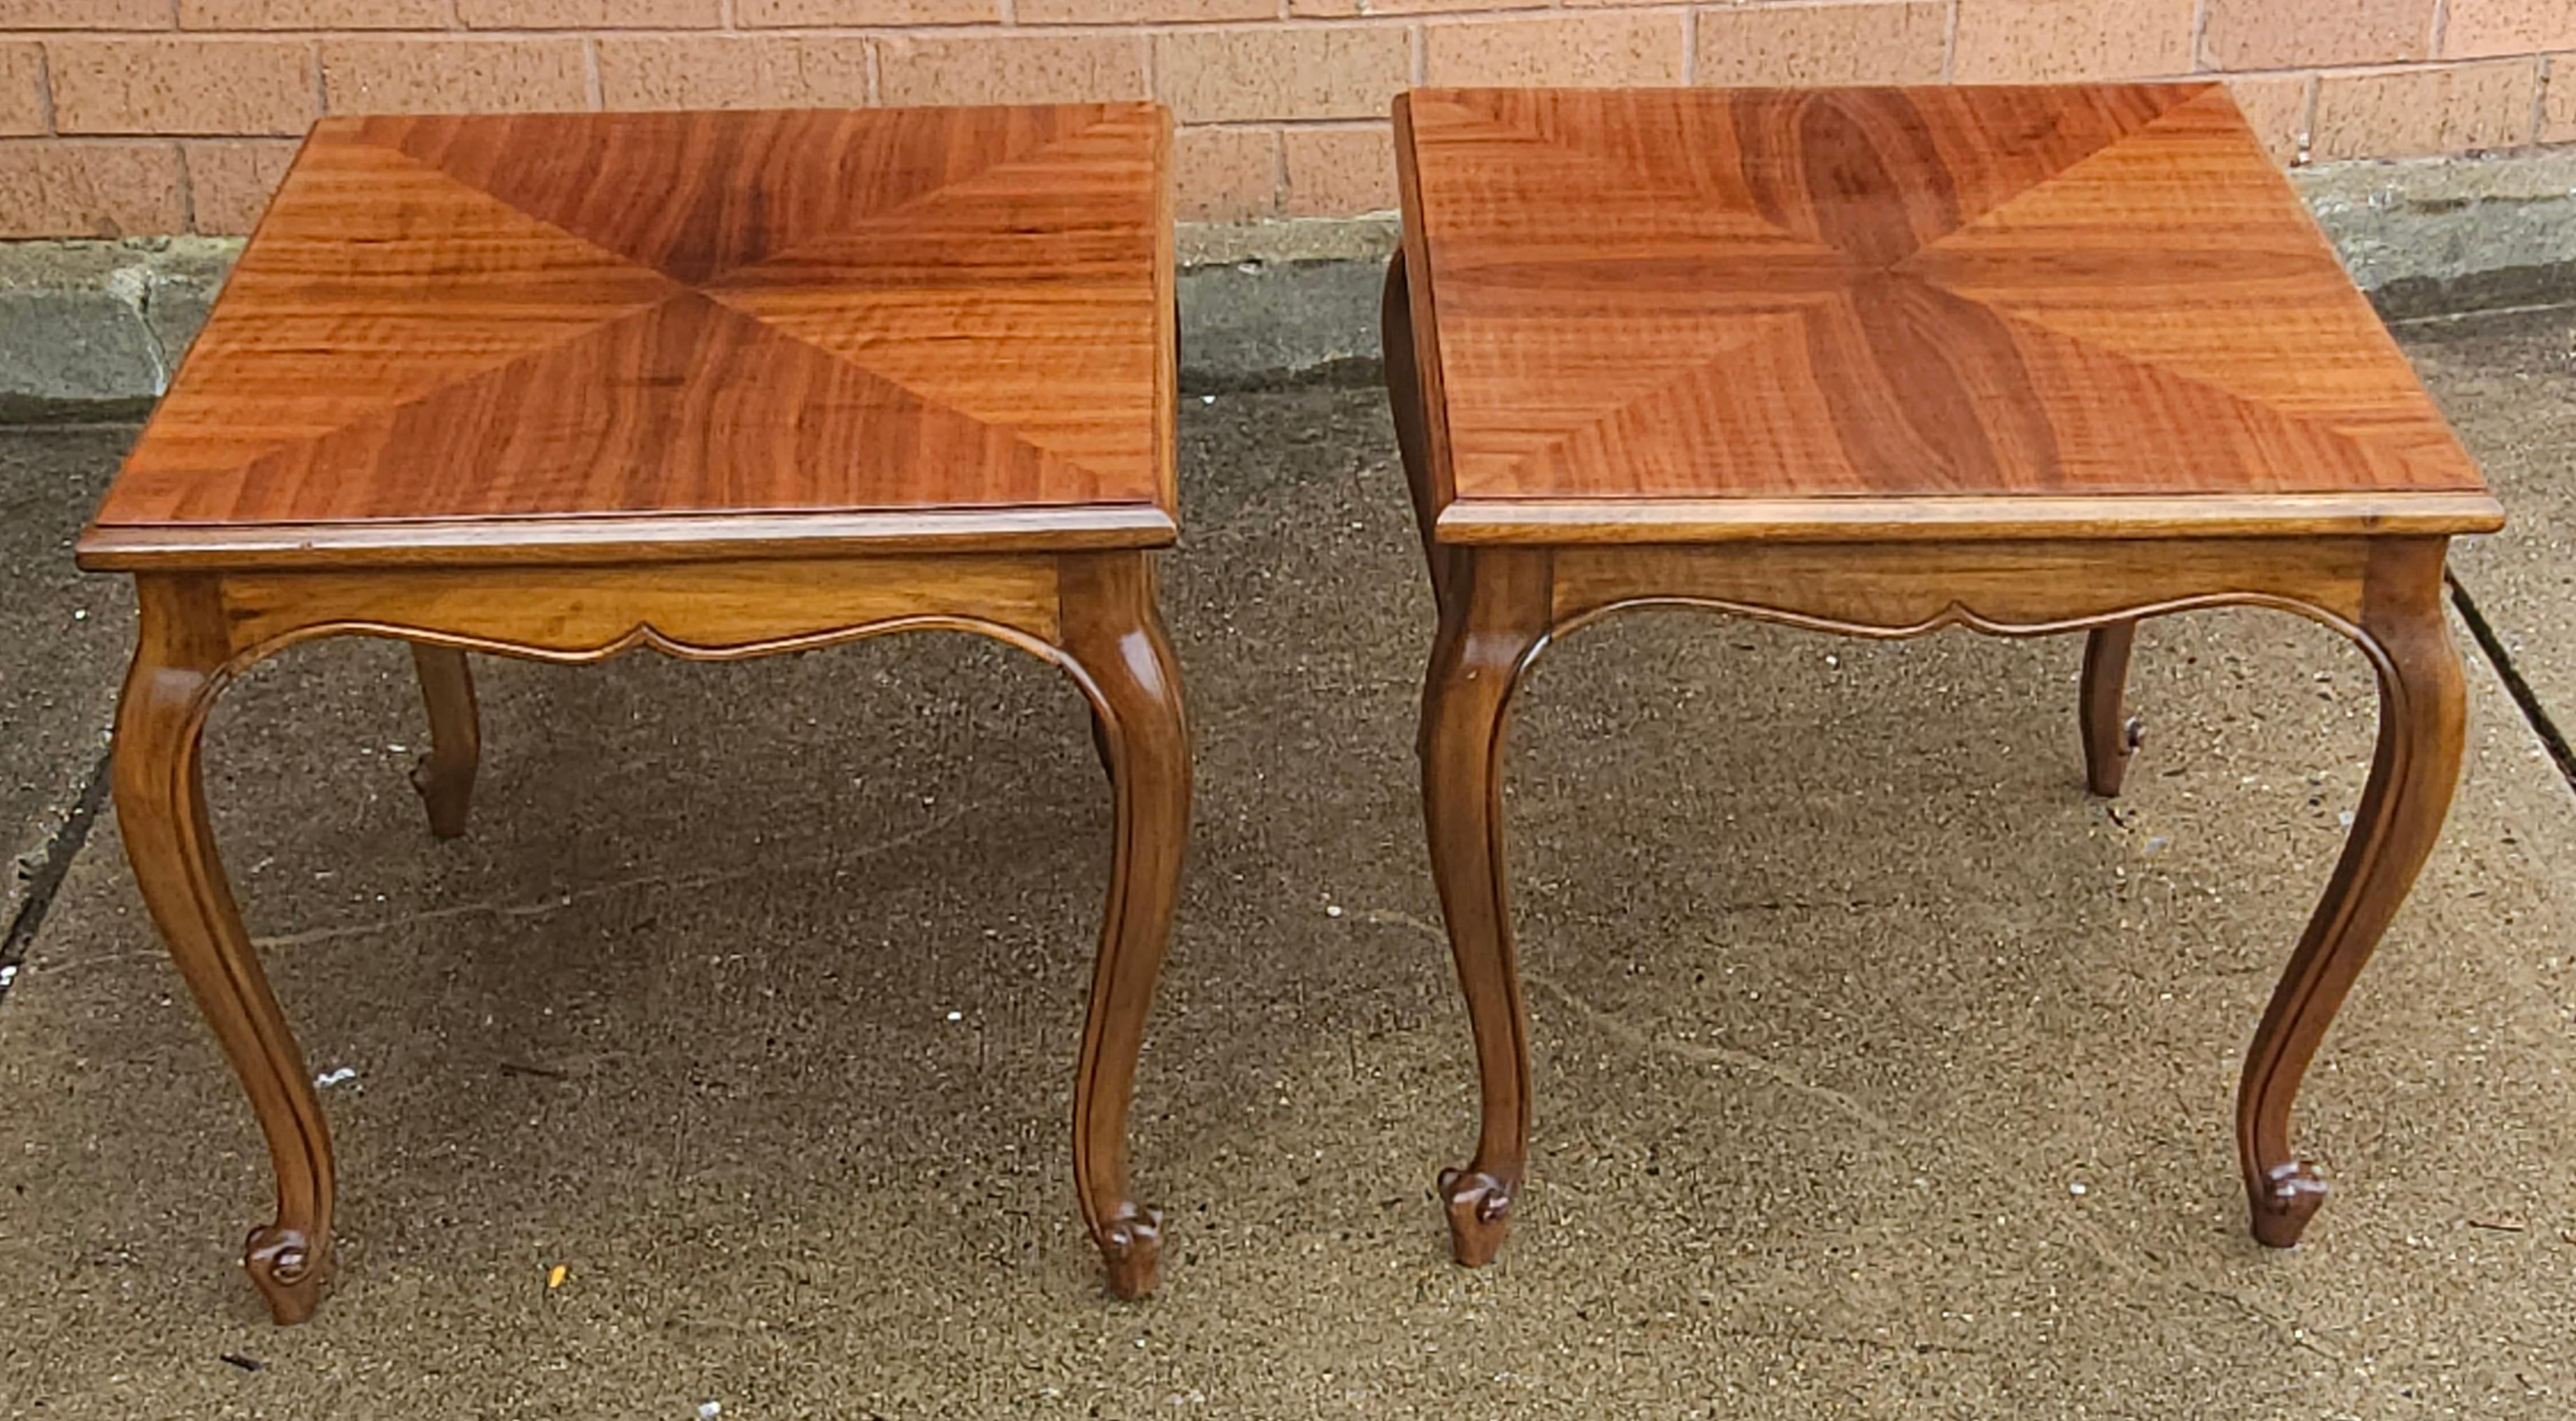 Hand-Crafted 20th C. Handcrafted Bookmatched Brazilian Rosewood Provincial Side Tables, Pair For Sale